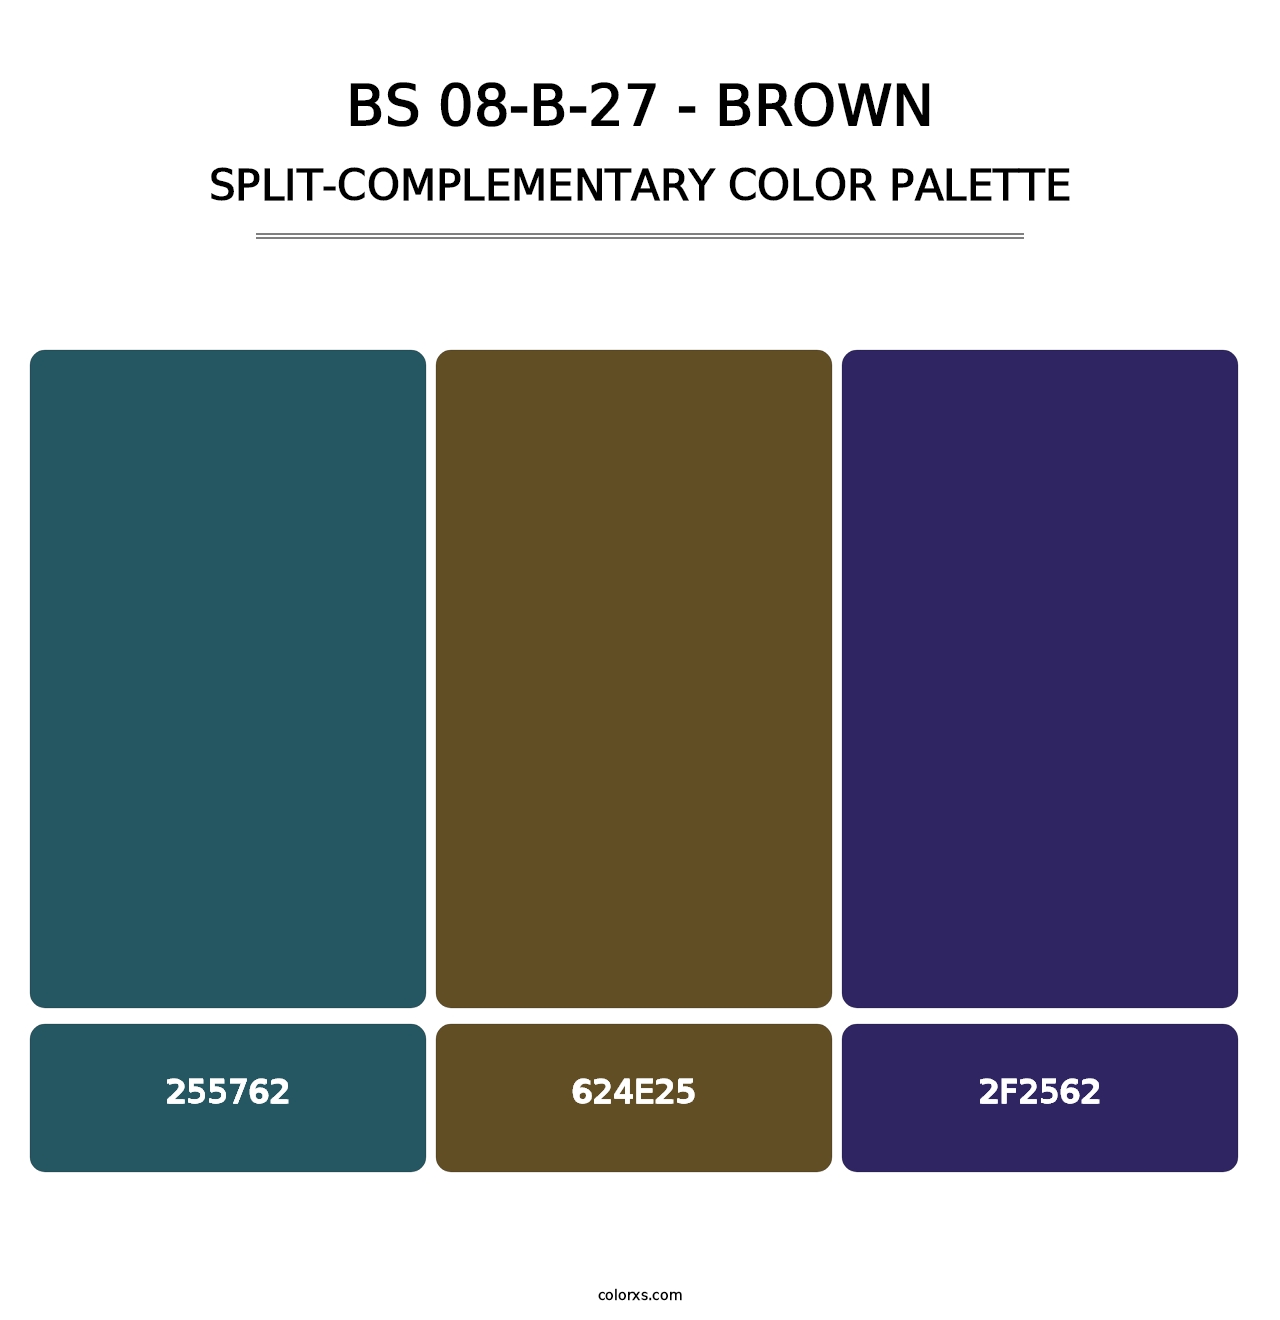 BS 08-B-27 - Brown - Split-Complementary Color Palette